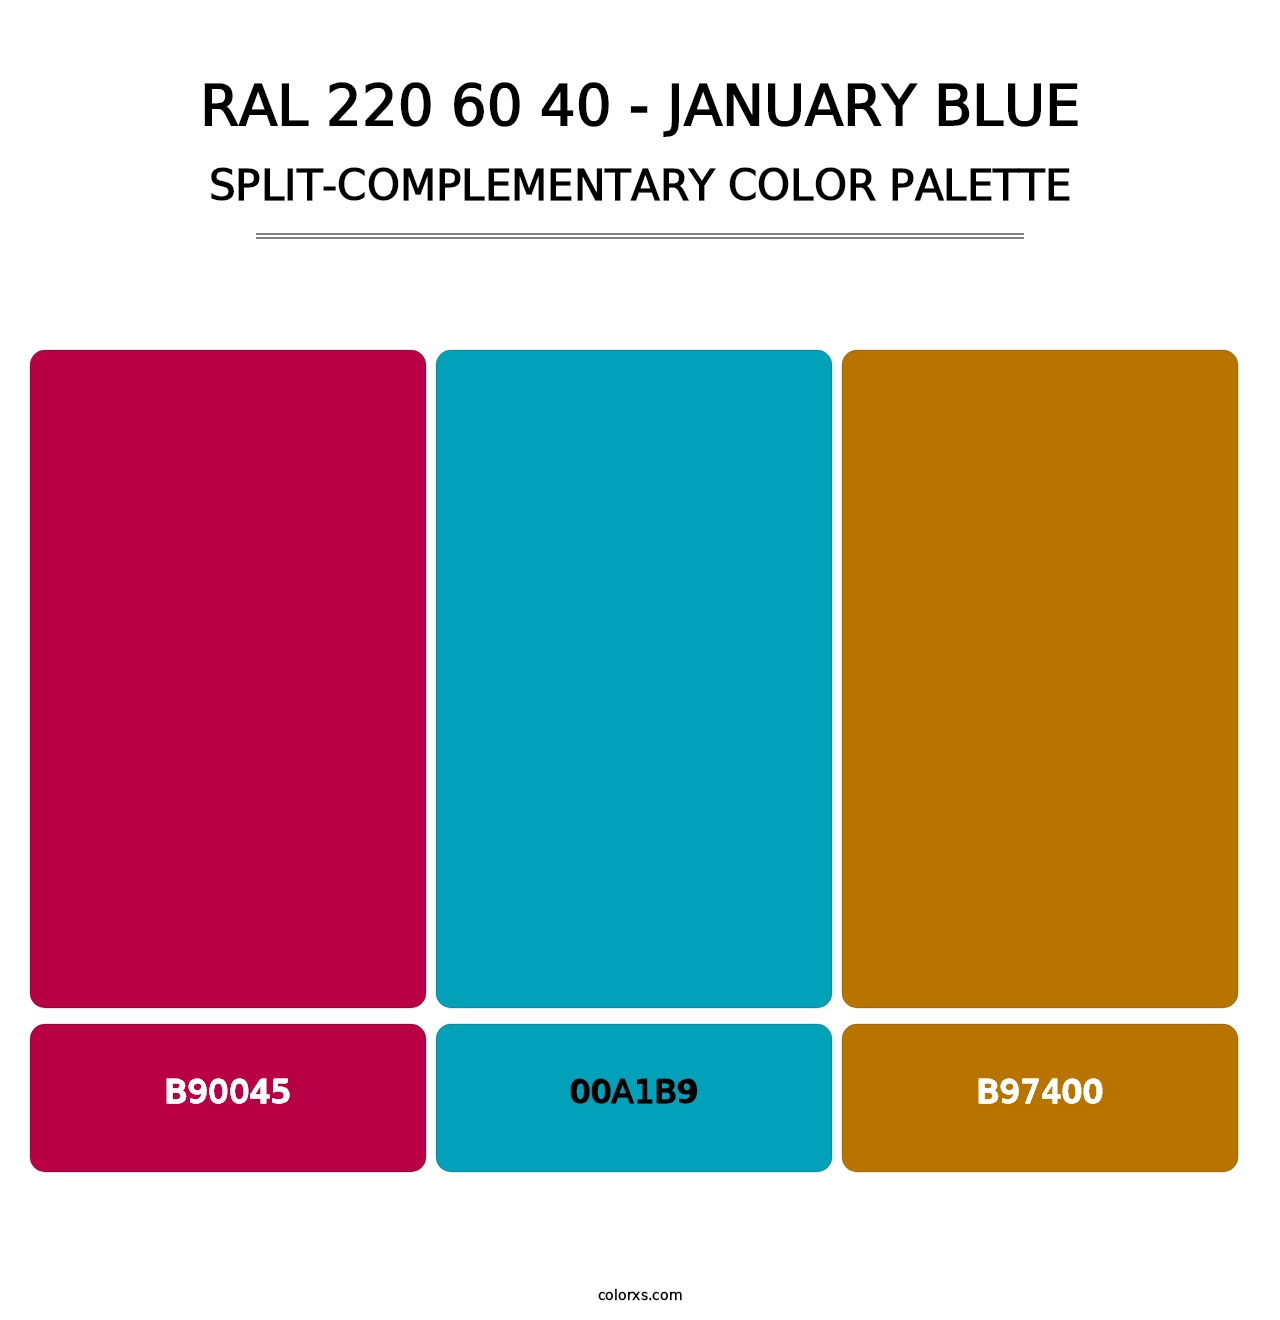 RAL 220 60 40 - January Blue - Split-Complementary Color Palette